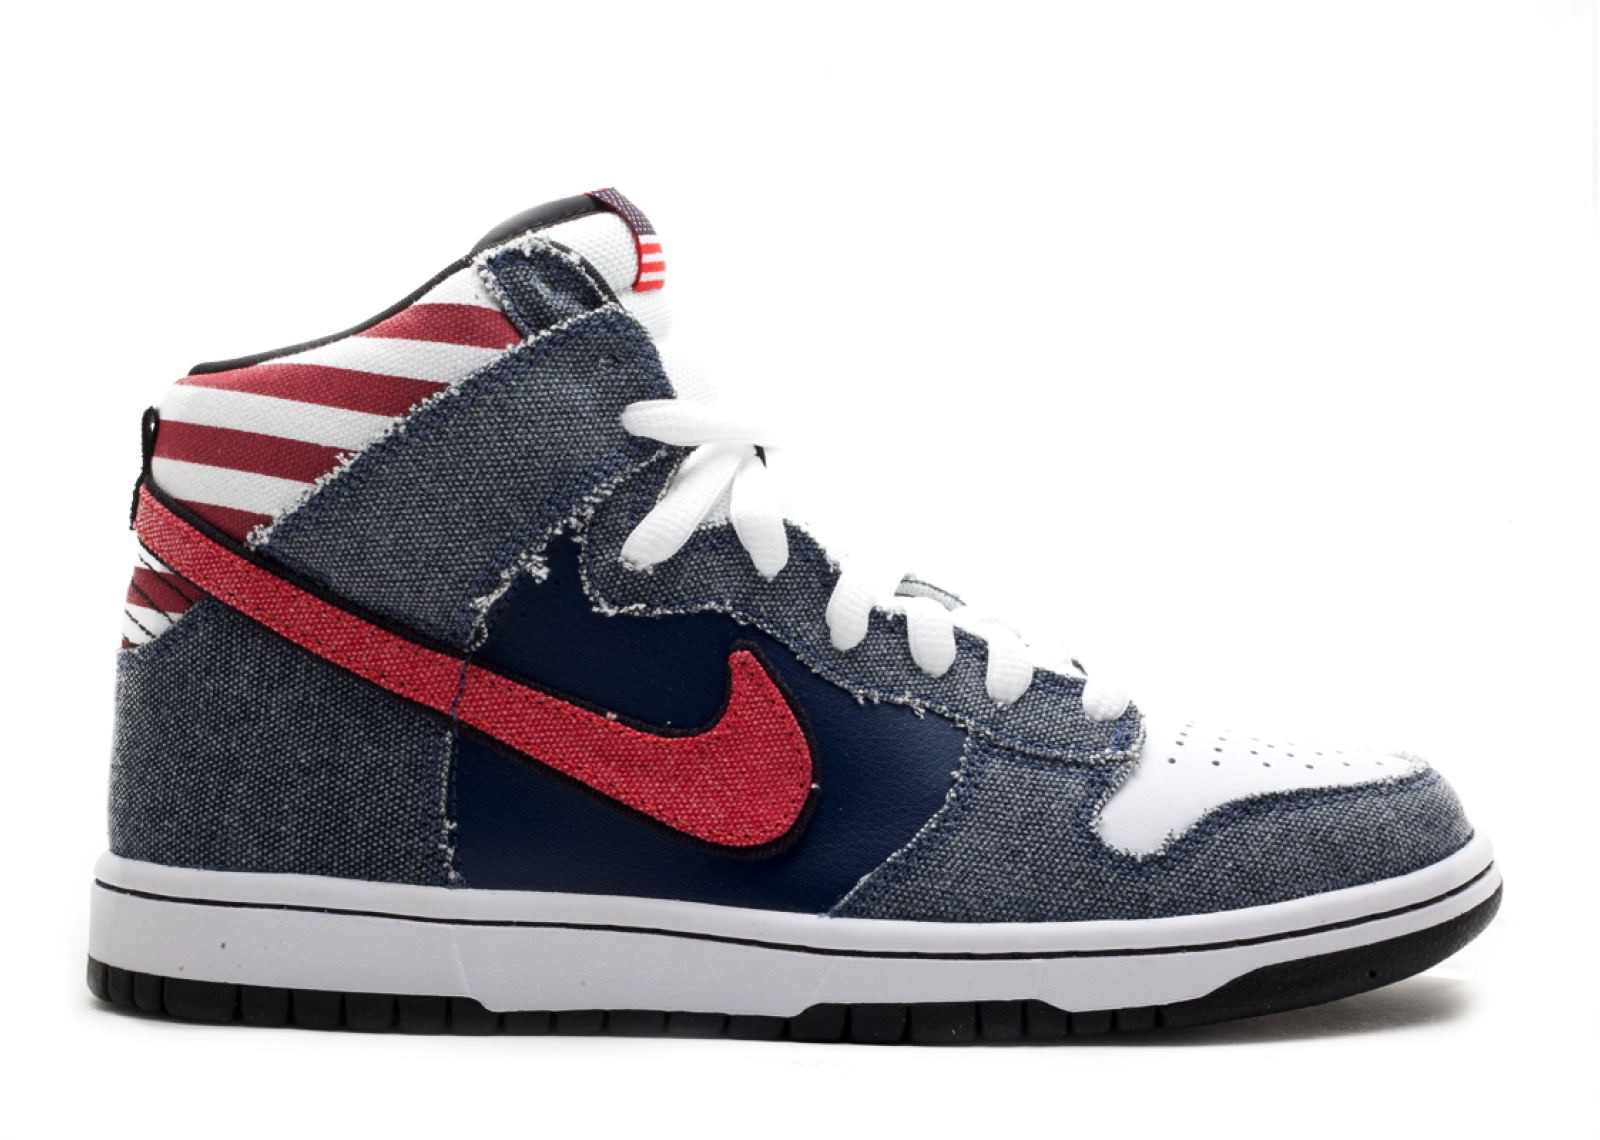 GmarShops - Dunk High Premium SB Born In The Usa Navy White Midnight Red 313171 - nike zoom insole for sale cheap shoes amazon - 100